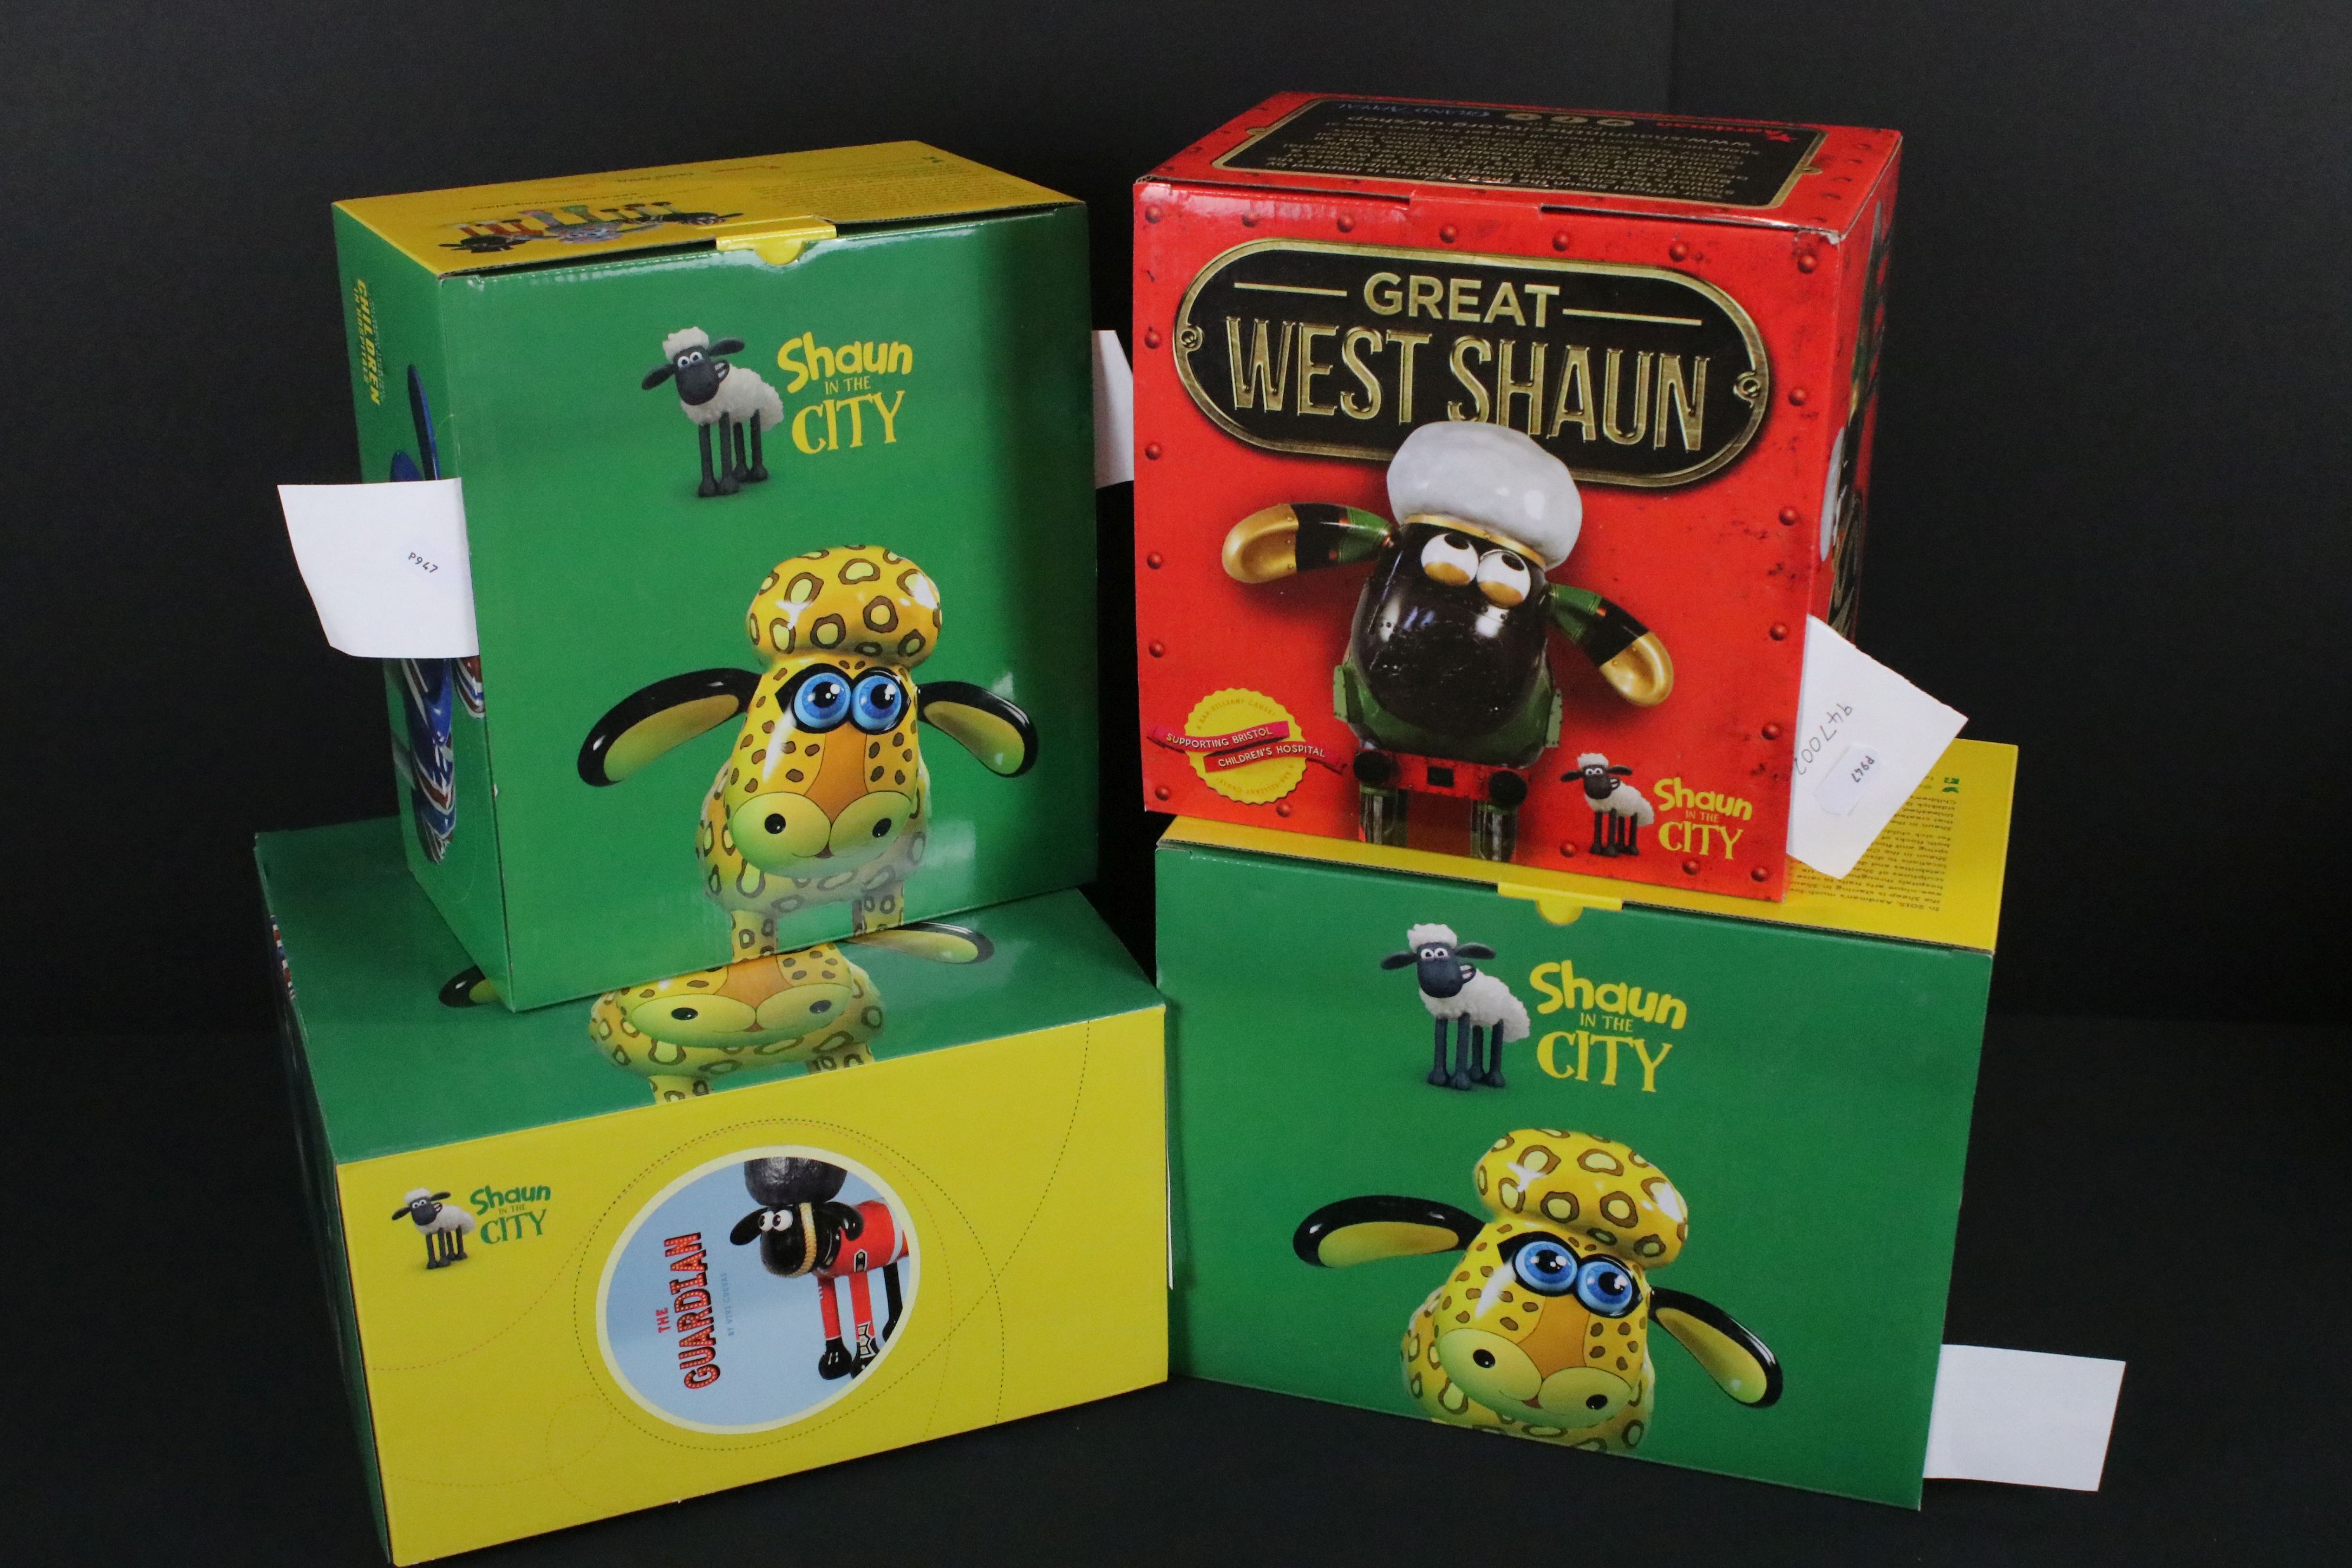 Four Boxed Aardman Animations Ltd Shaun in the City Figurines including Great West Shaun, The